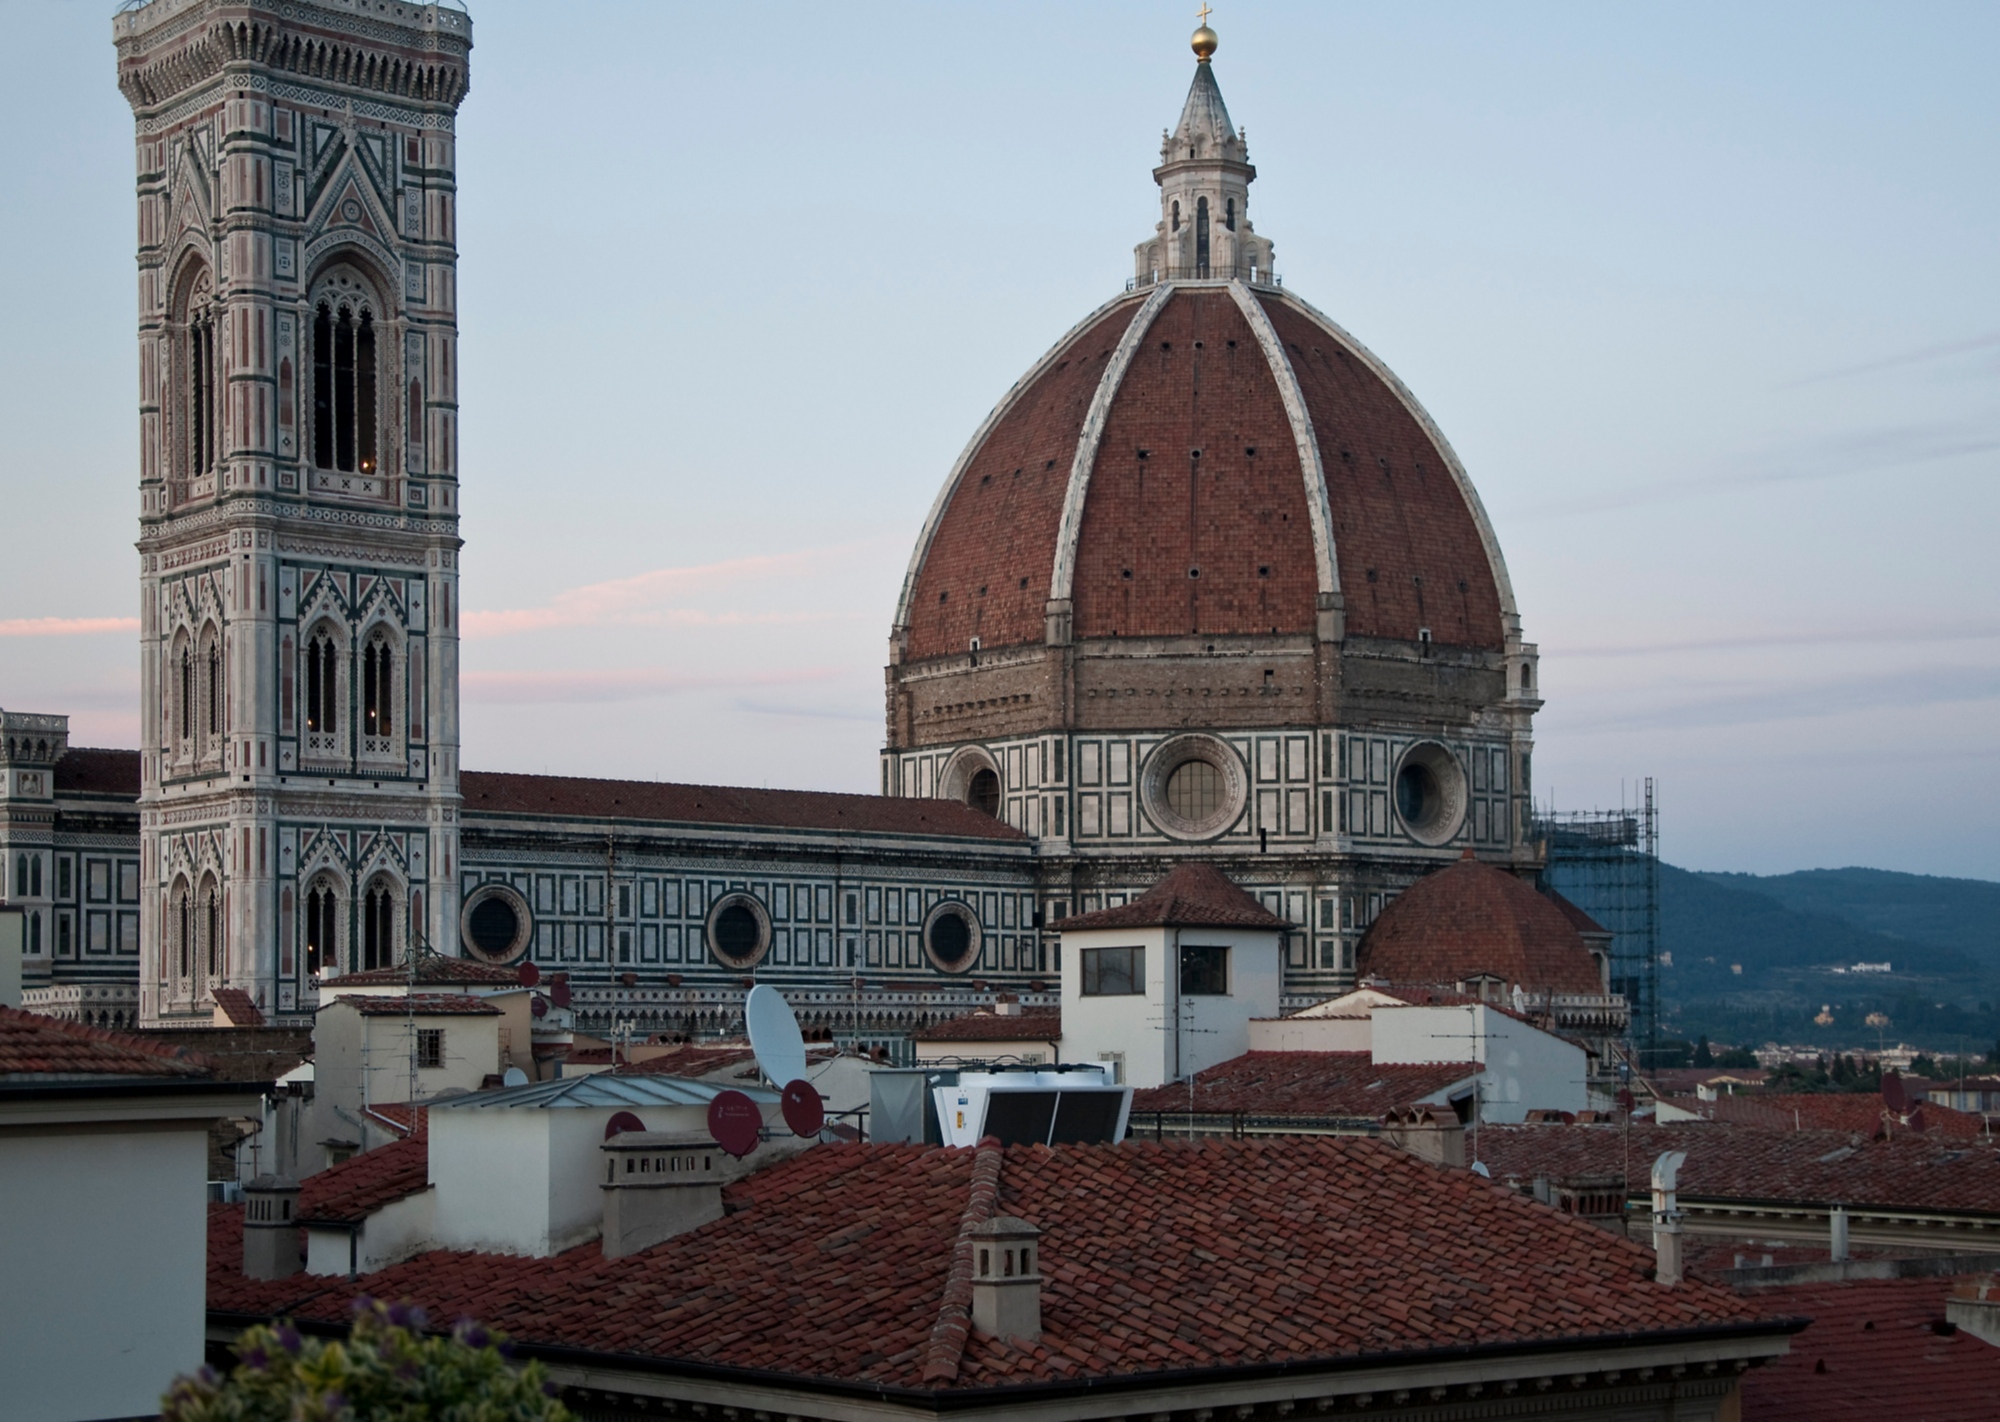 Duomo as seen from the terrace of the Rinascente